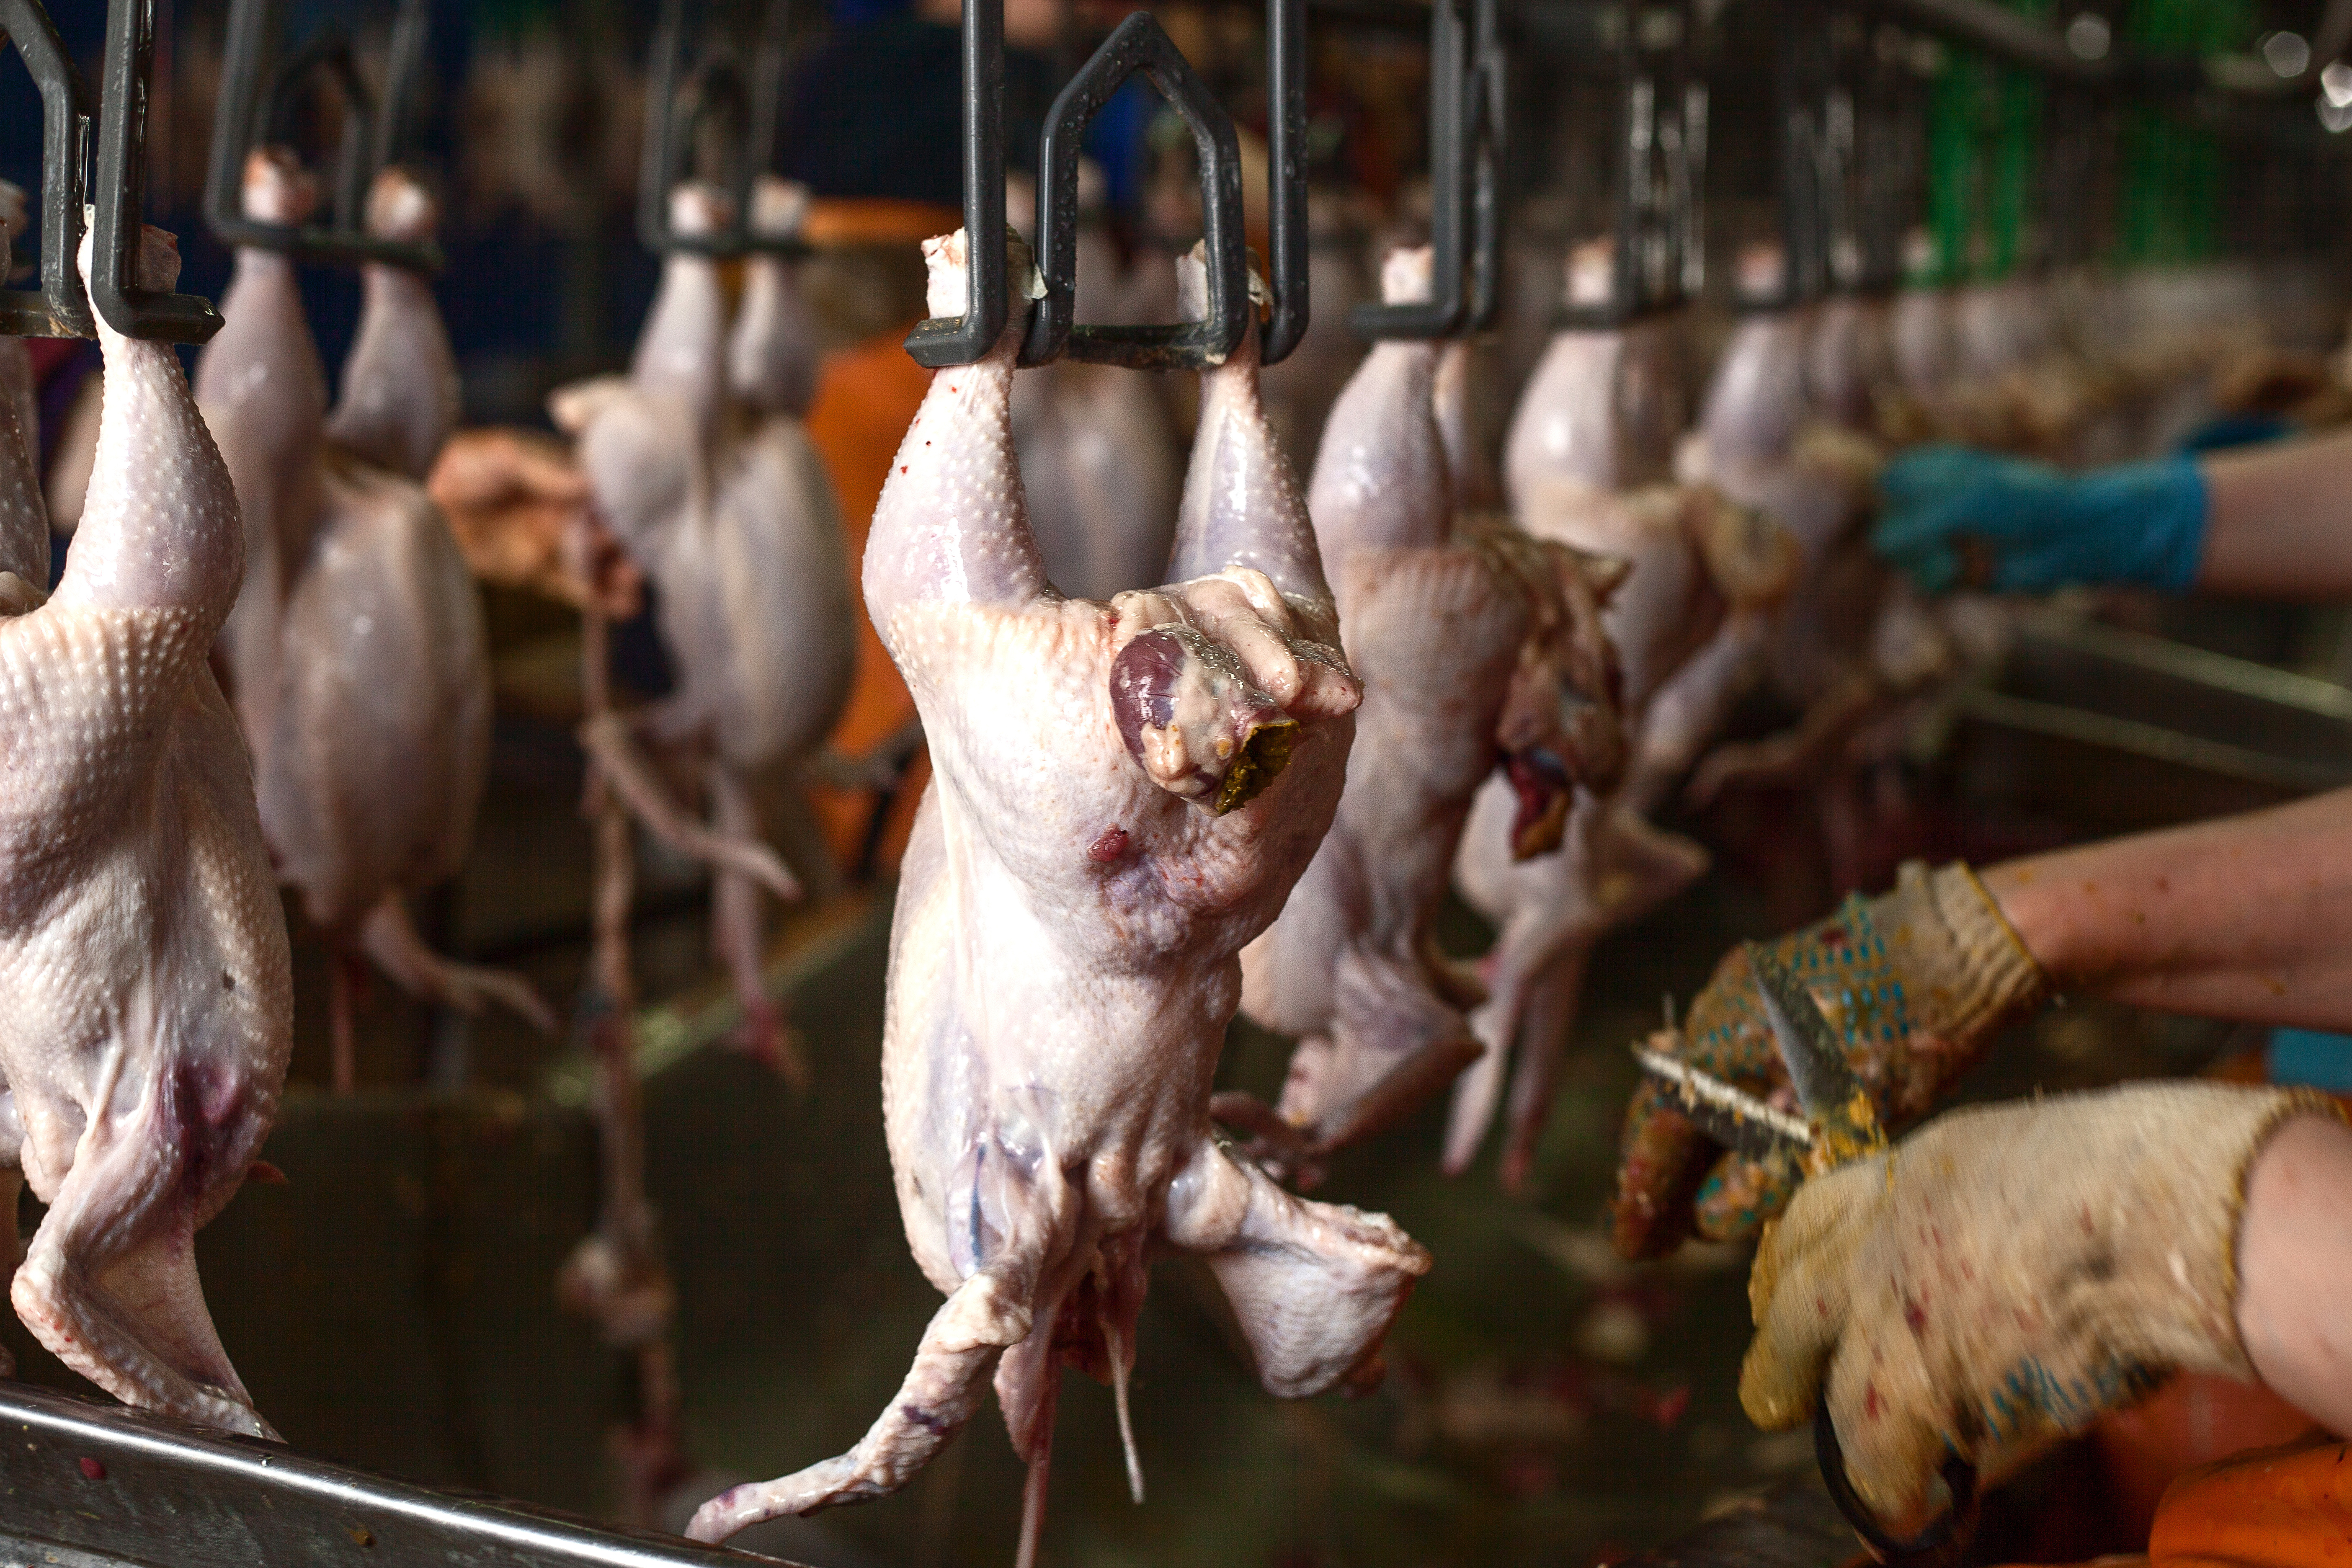 Chicken carcasses being processed on a conveyer belt